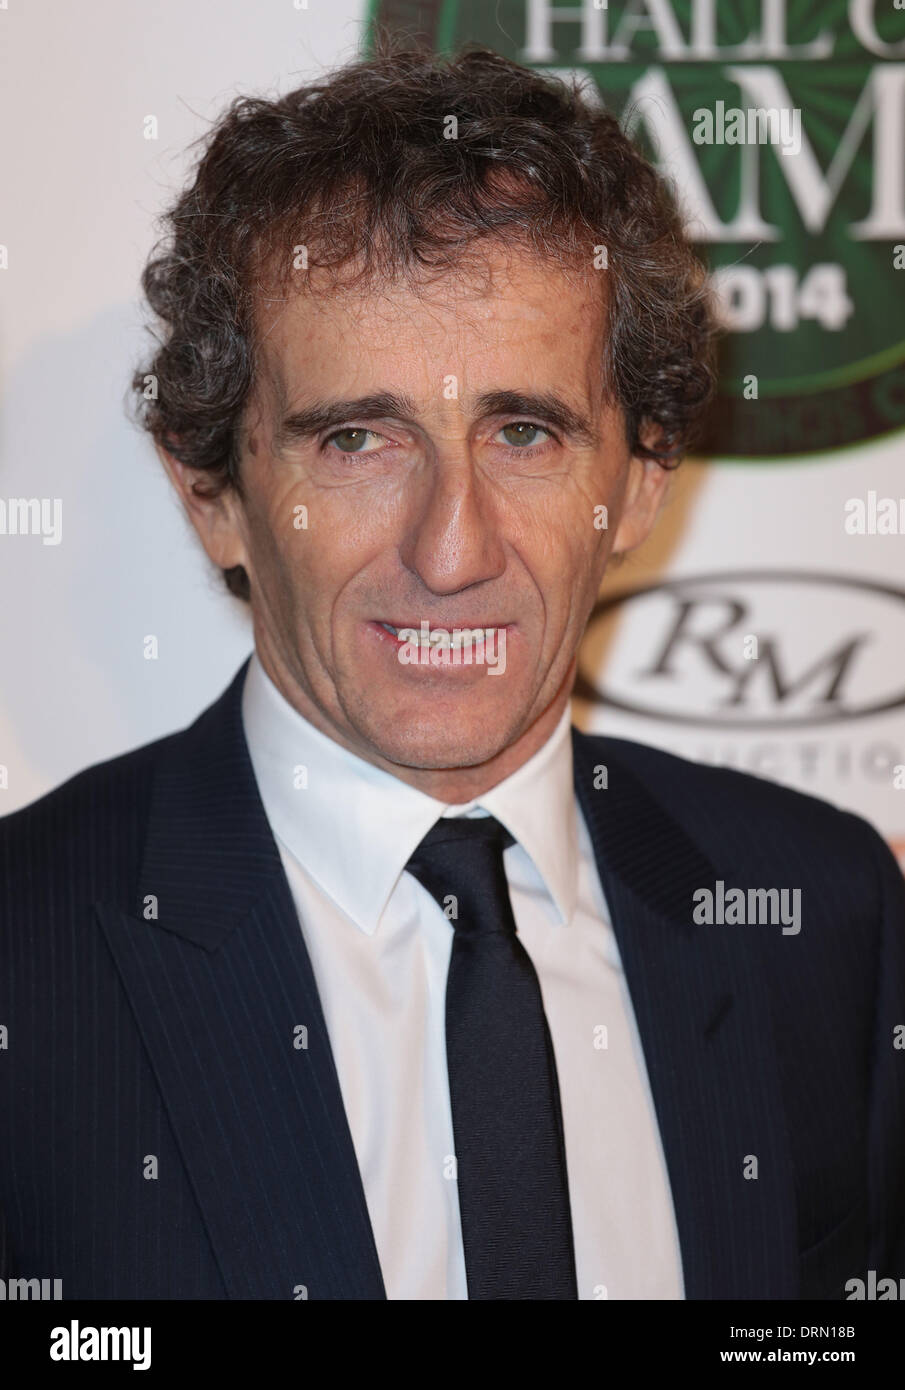 London, UK, 29th January 2014 Four-time Formula One Drivers' Champion, Alain Prost, attends MotorSport Magazine Hall of Fame award ceremony at The Royal Opera House, Covent Garden, London, UK Credit:  MRP/Alamy Live News Stock Photo